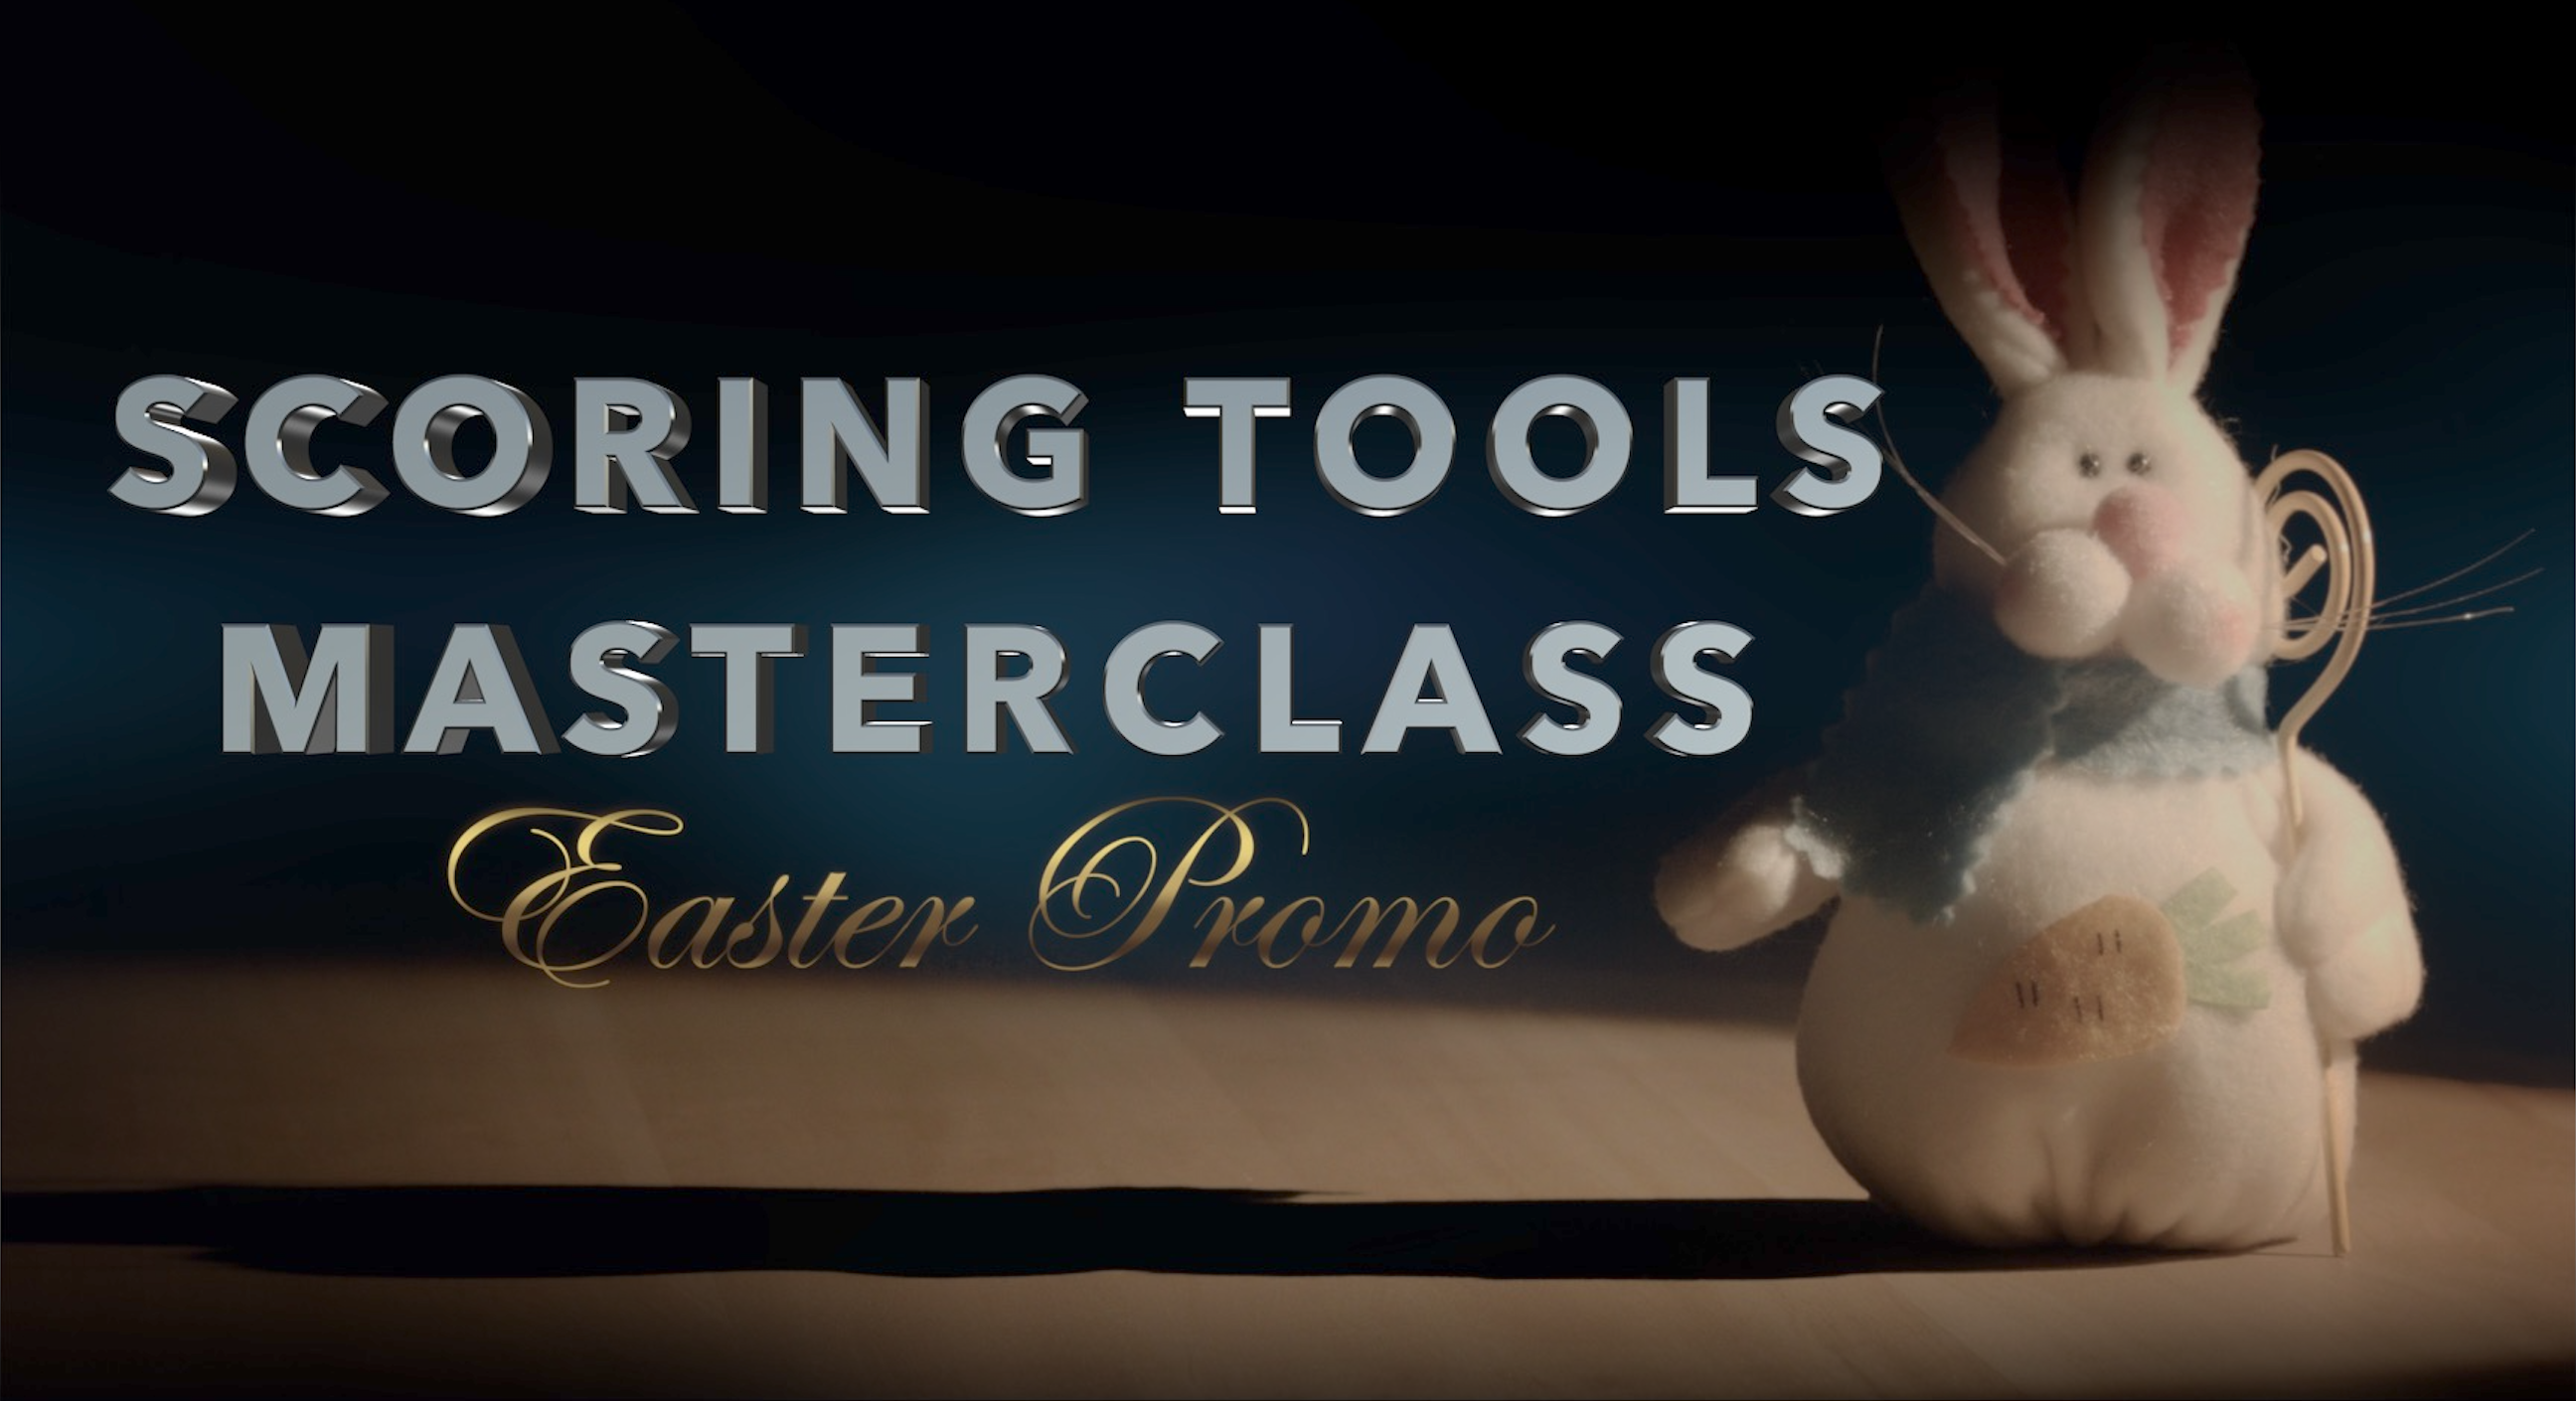 Scoring Tools Masterclass – Easter Special Discount